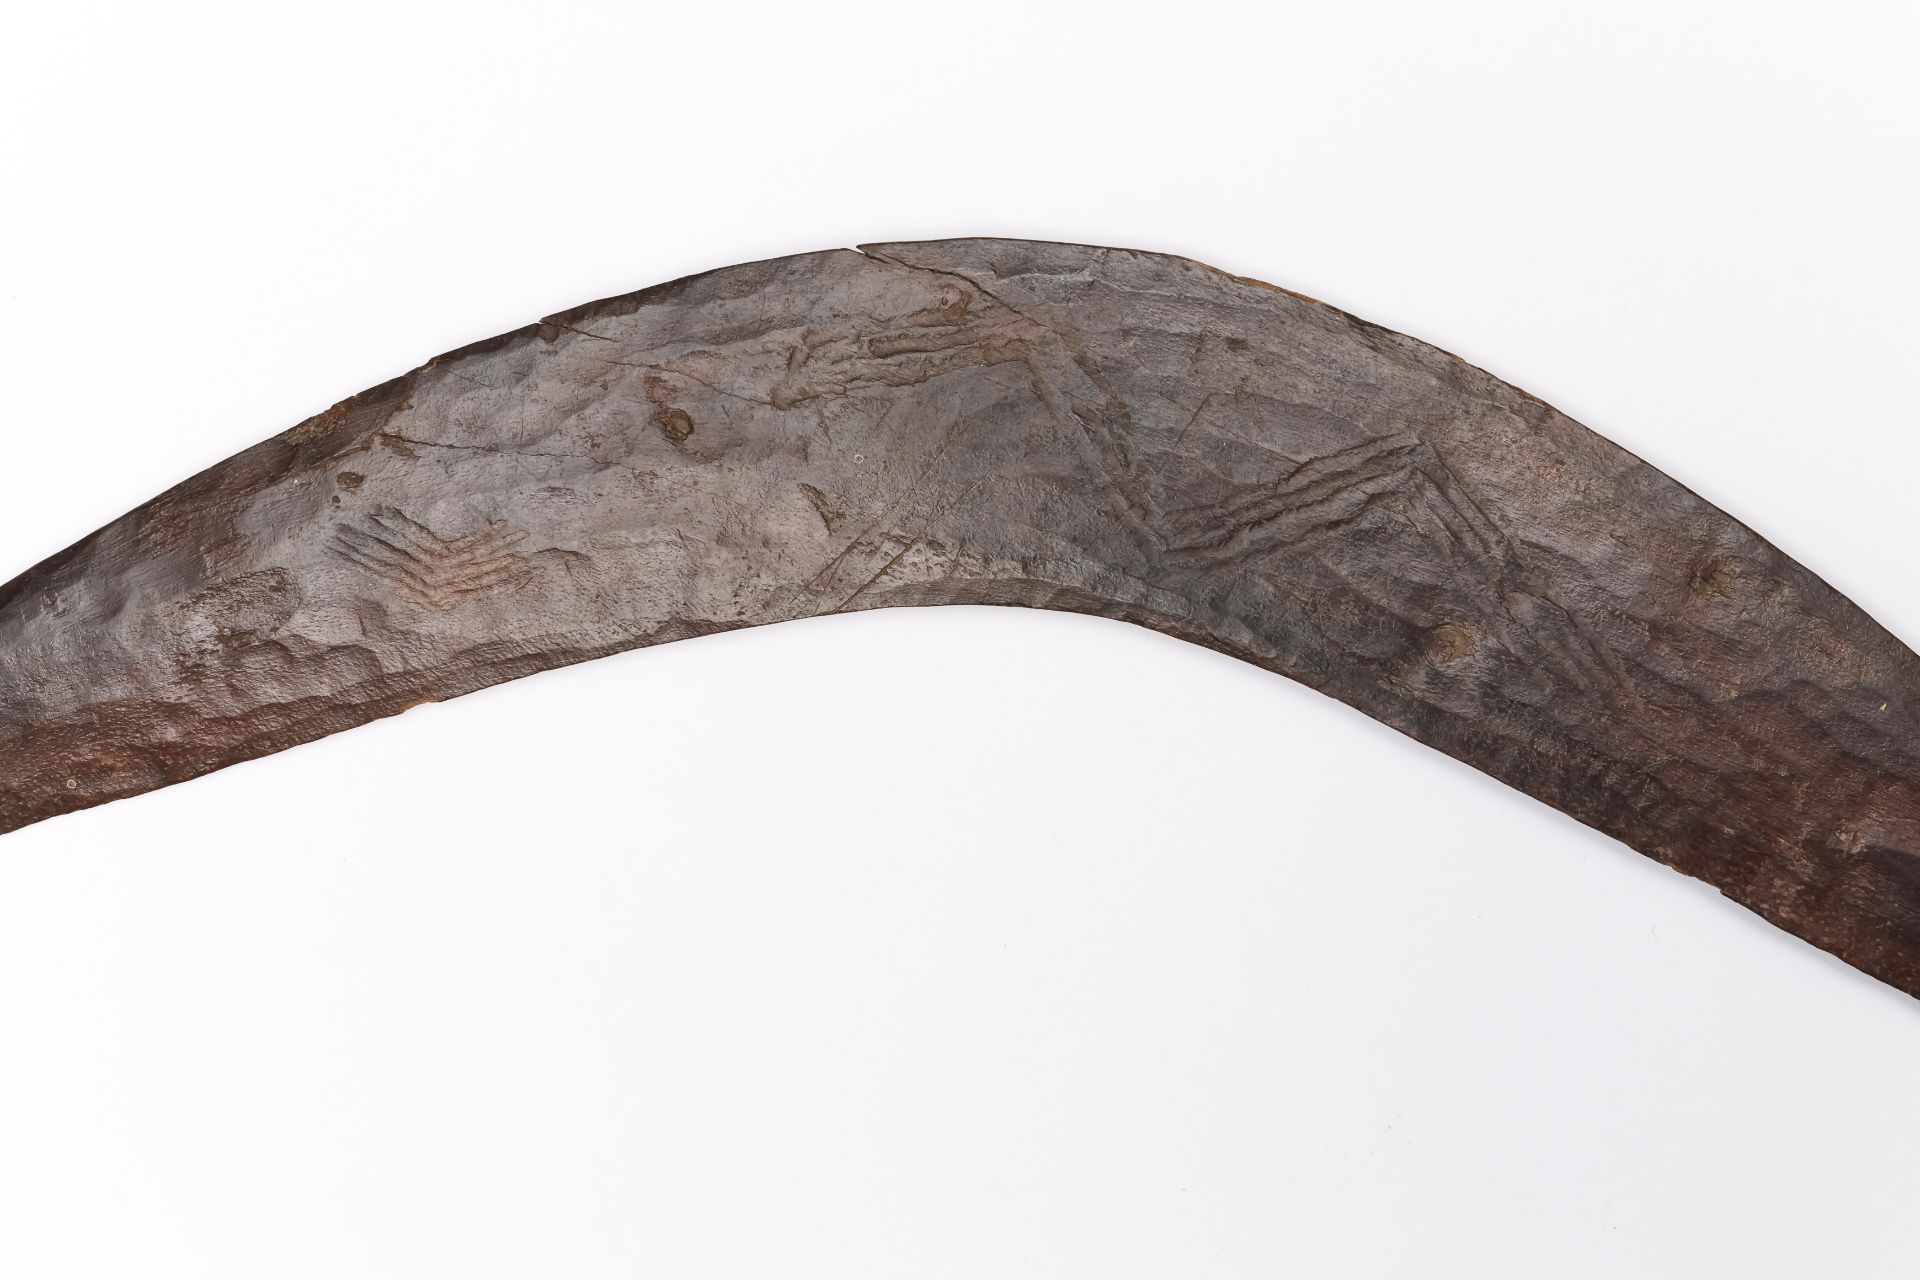 Australia, two Aboriginal boomerangs, both with a notched pattern. - Image 2 of 3